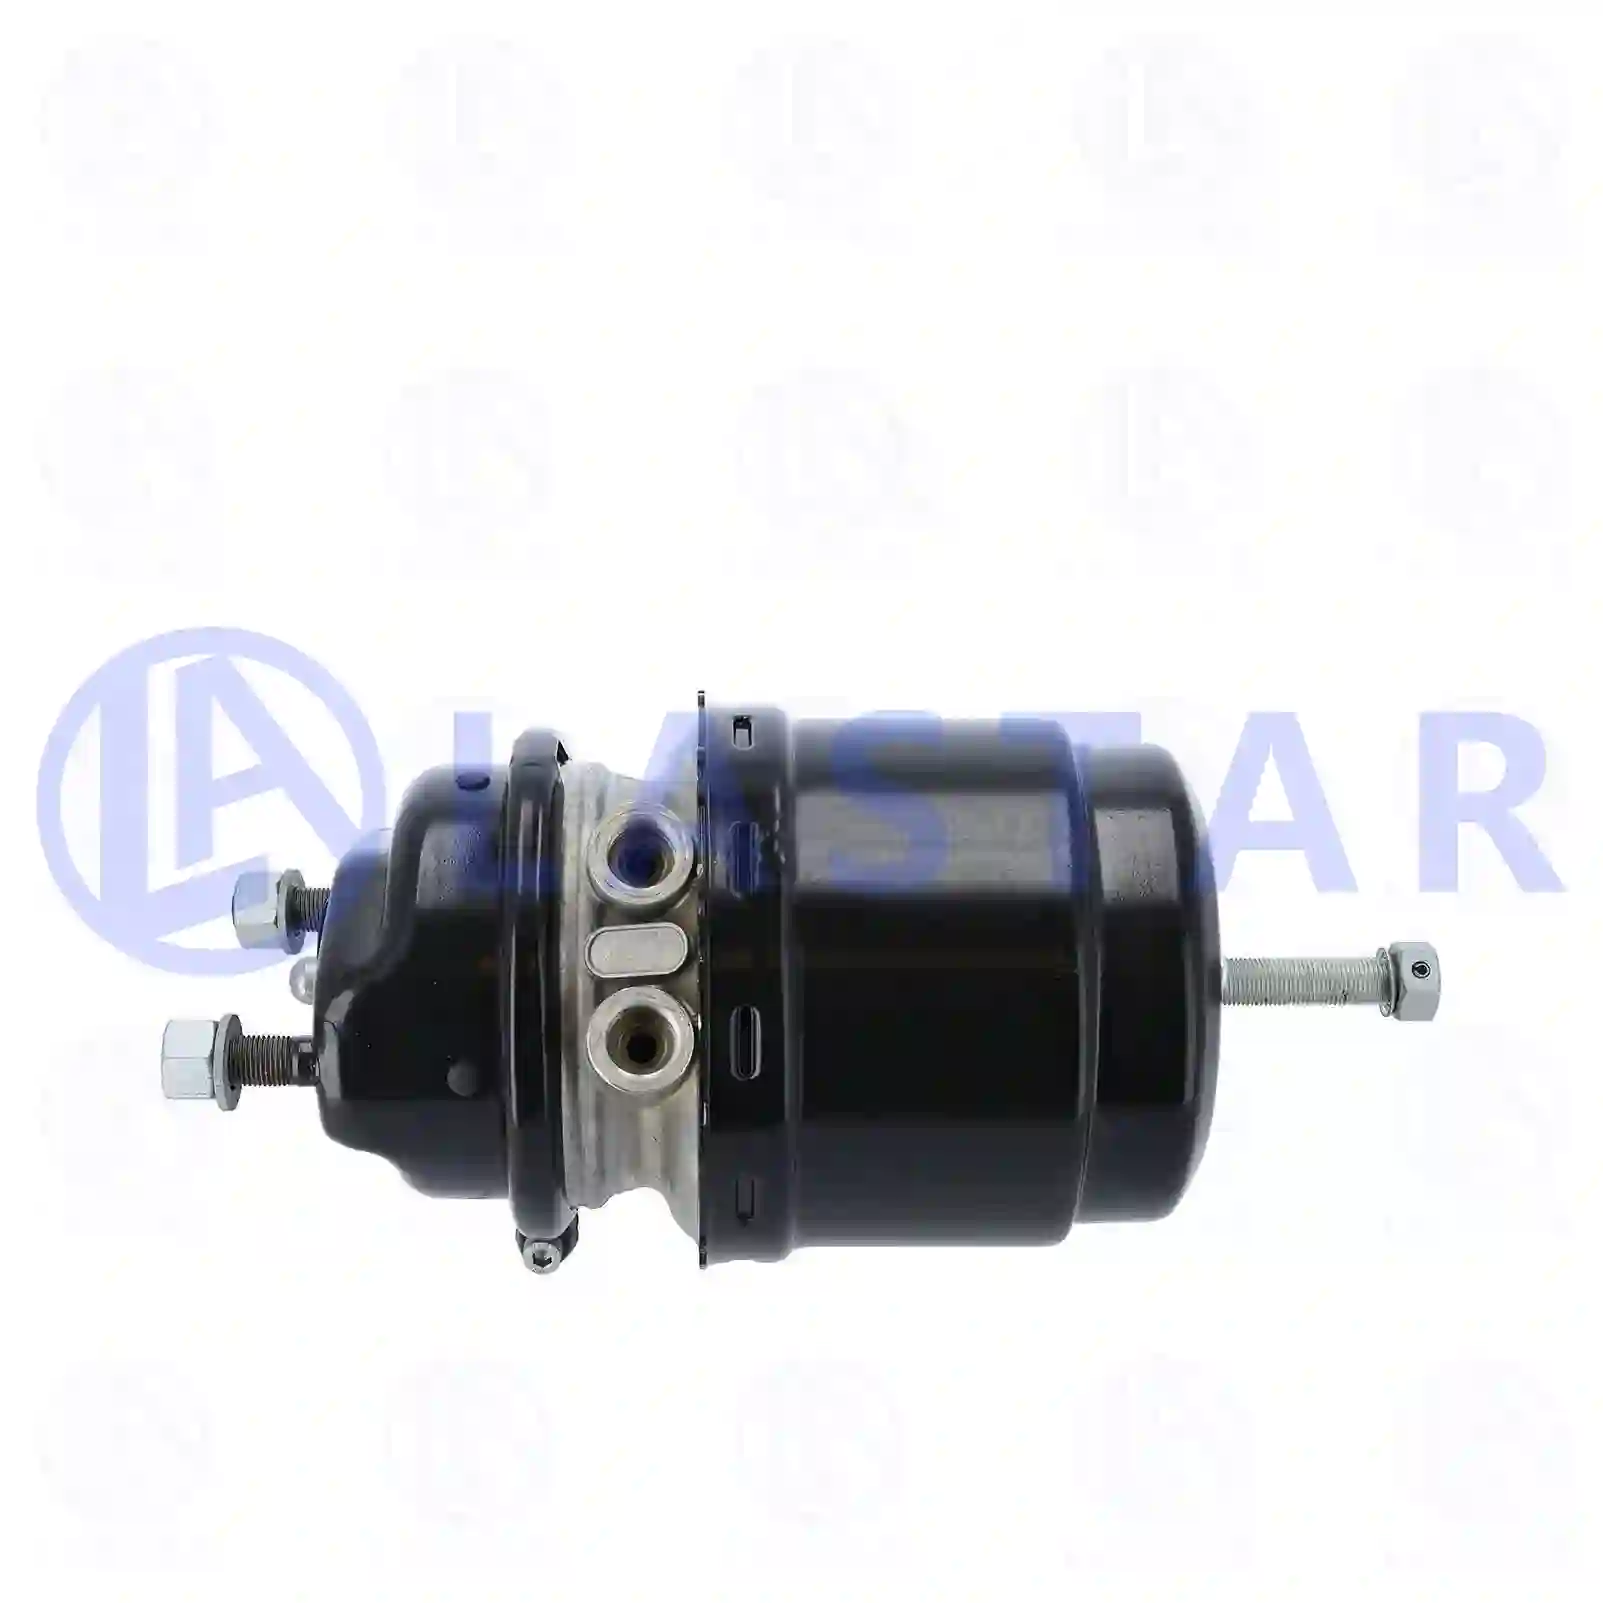 Spring brake cylinder, right, 77715394, 1505452, 0154202918, 0204201318, , ||  77715394 Lastar Spare Part | Truck Spare Parts, Auotomotive Spare Parts Spring brake cylinder, right, 77715394, 1505452, 0154202918, 0204201318, , ||  77715394 Lastar Spare Part | Truck Spare Parts, Auotomotive Spare Parts